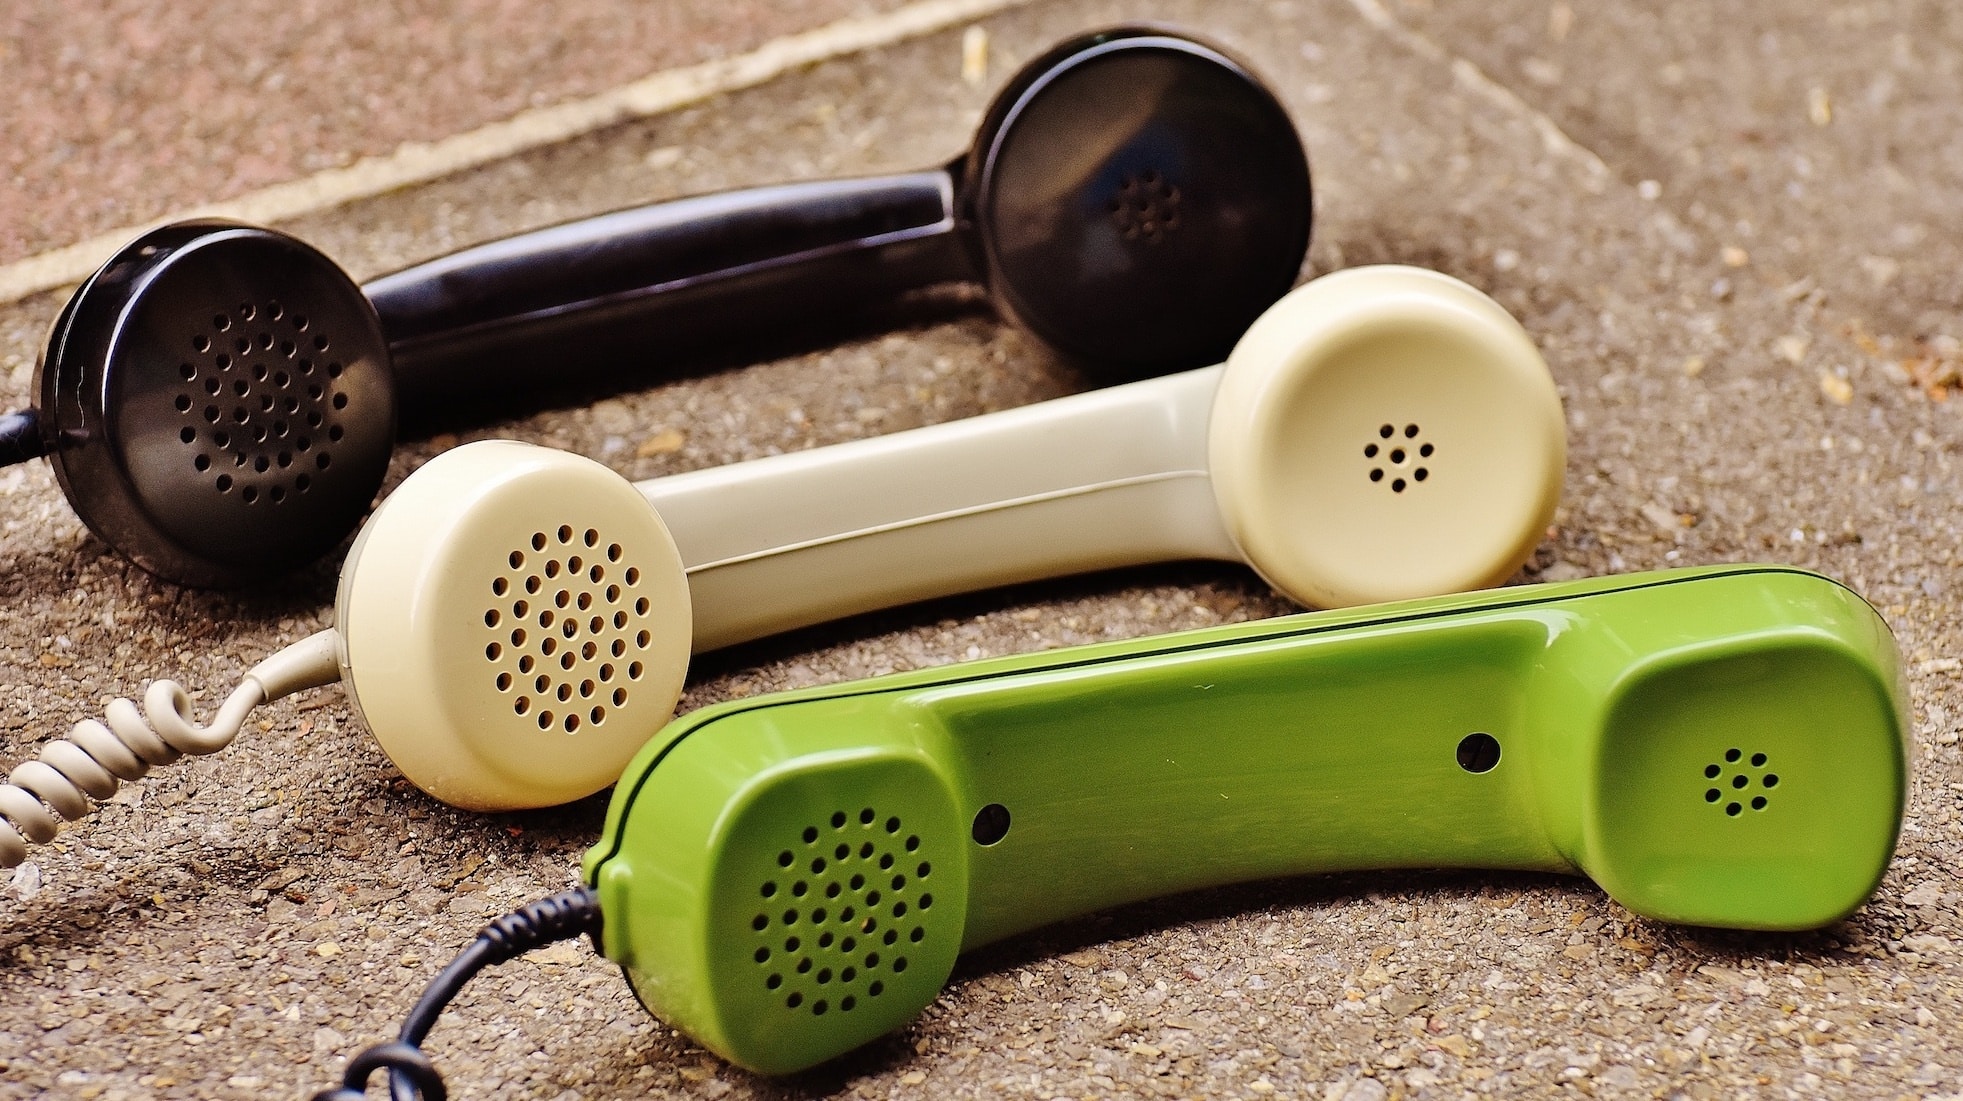 Three vintage telephone handsets in black, cream, and green lying on a pavement.